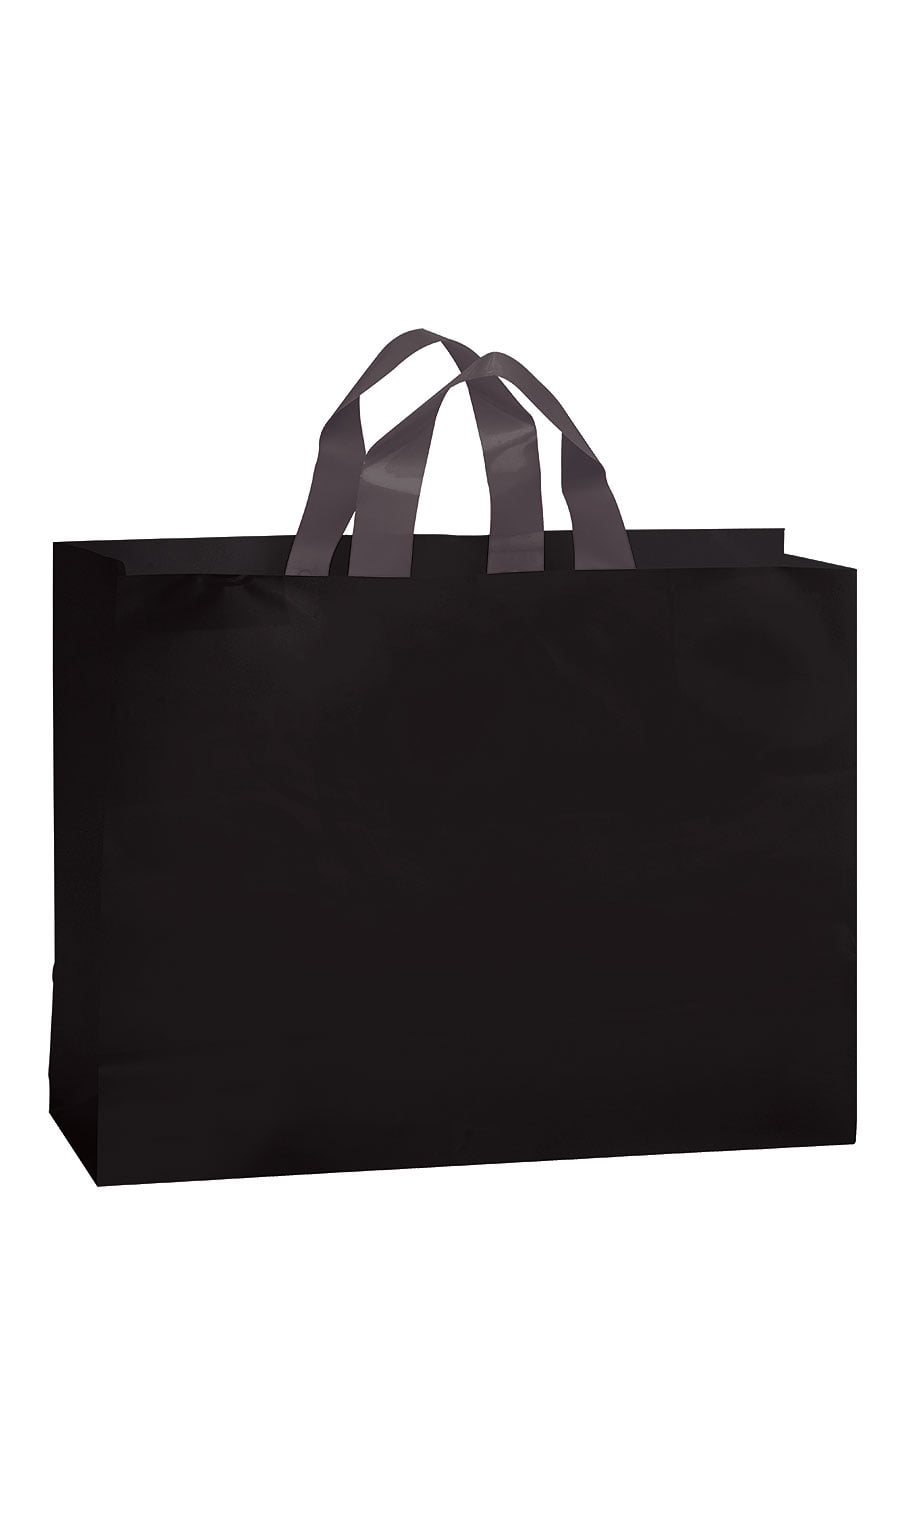 Details about   10 Qty Chocolate Brown Frosted Design Retail Shopping Bags w/ Handles 5"x3"x7" 